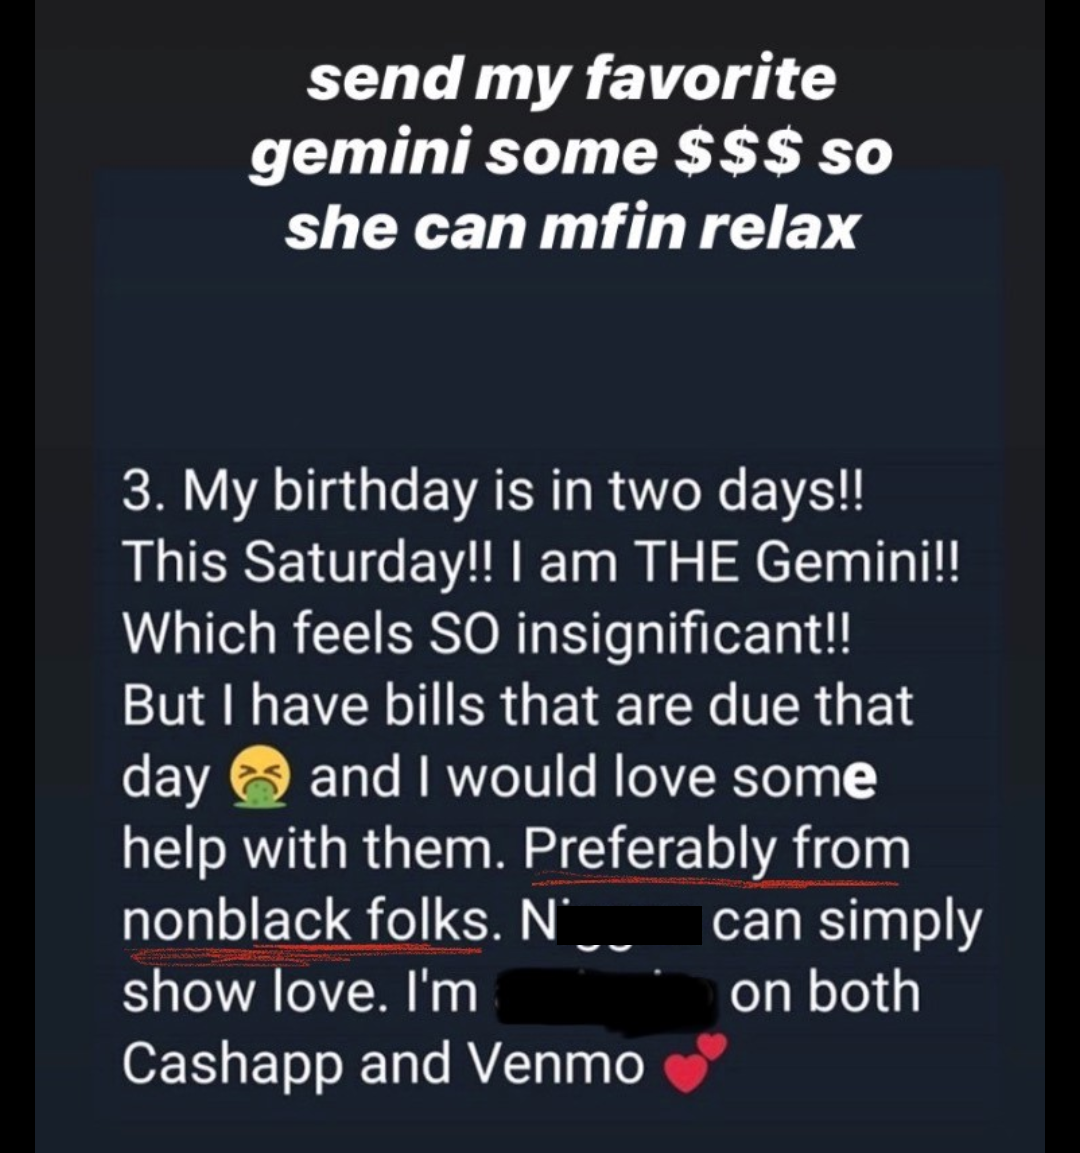 screenshot - send my favorite gemini some $$$ so she can mfin relax 3. My birthday is in two days!! This Saturday!! I am The Gemini!! Which feels So insignificant!! But I have bills that are due that day and I would love some help with them. Preferably fr